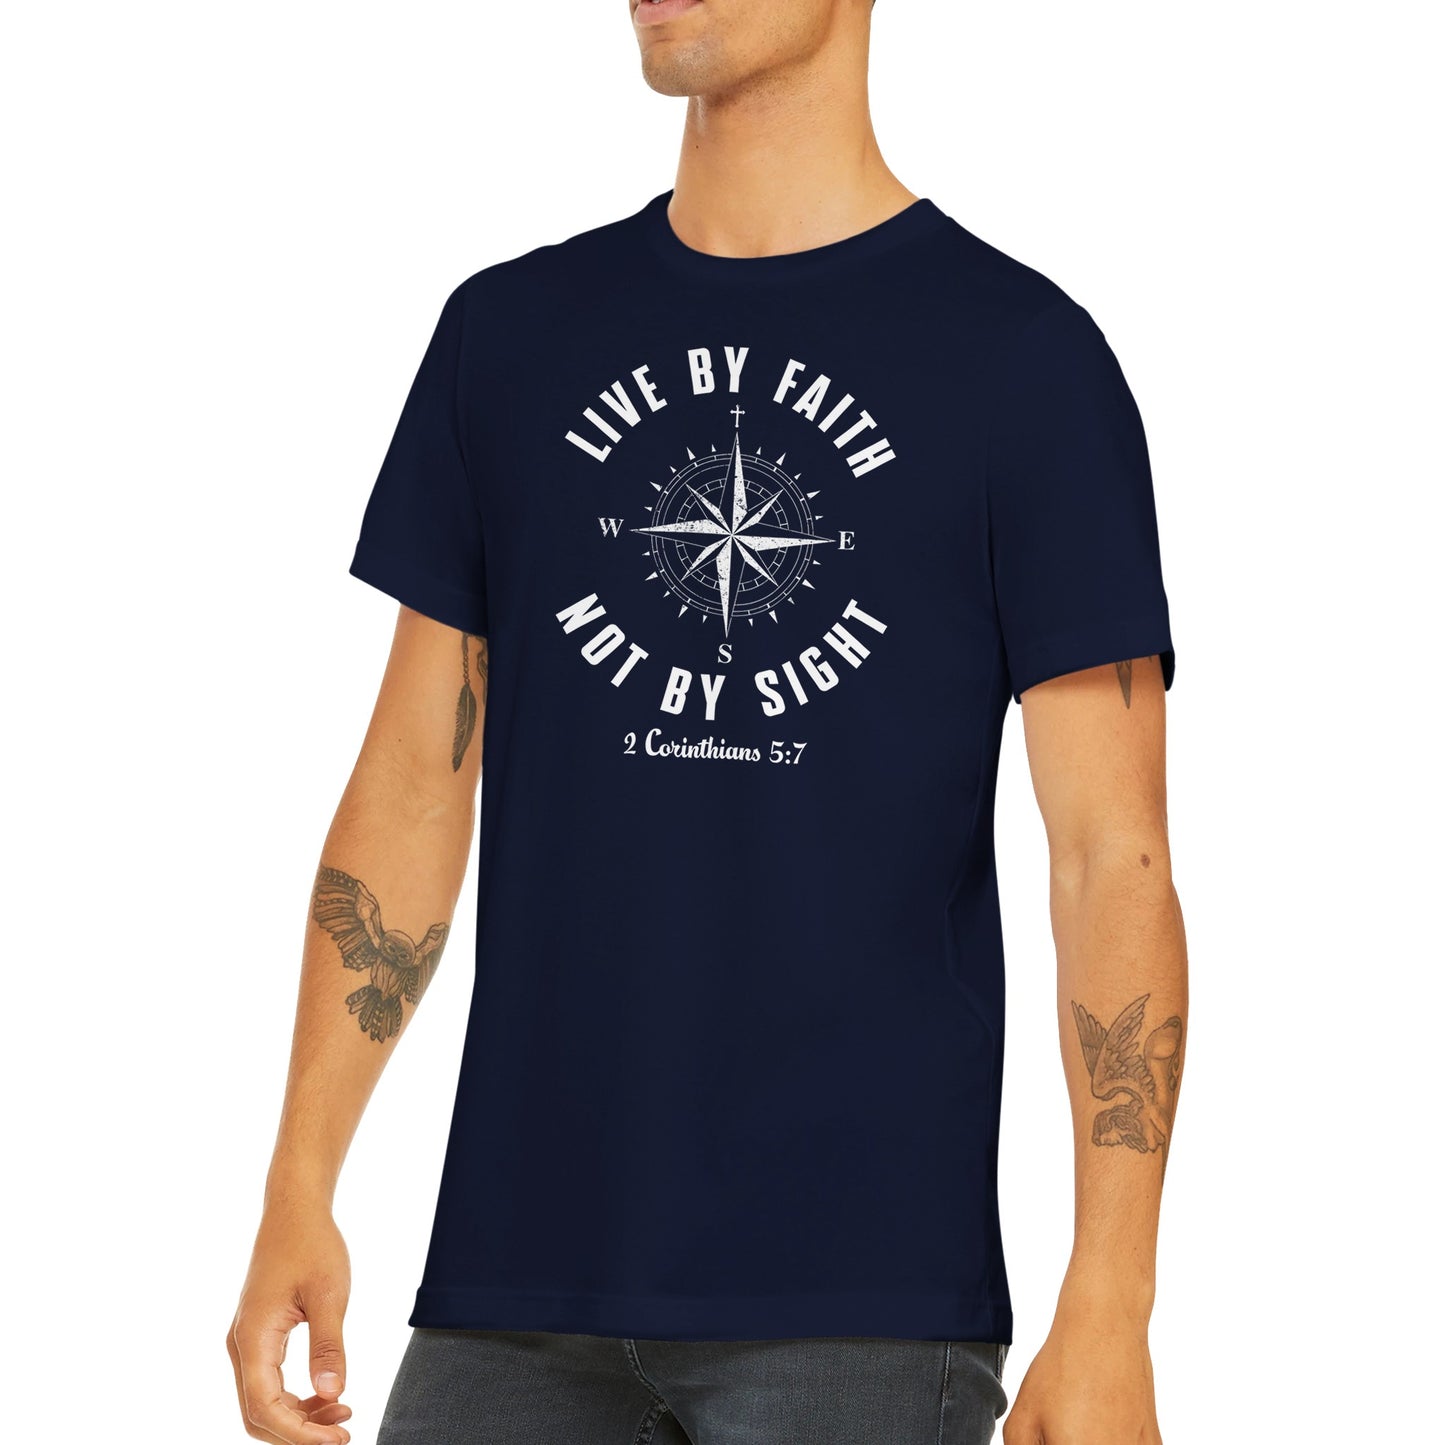 "Live By Faith Not By Sight" Christian T-Shirt